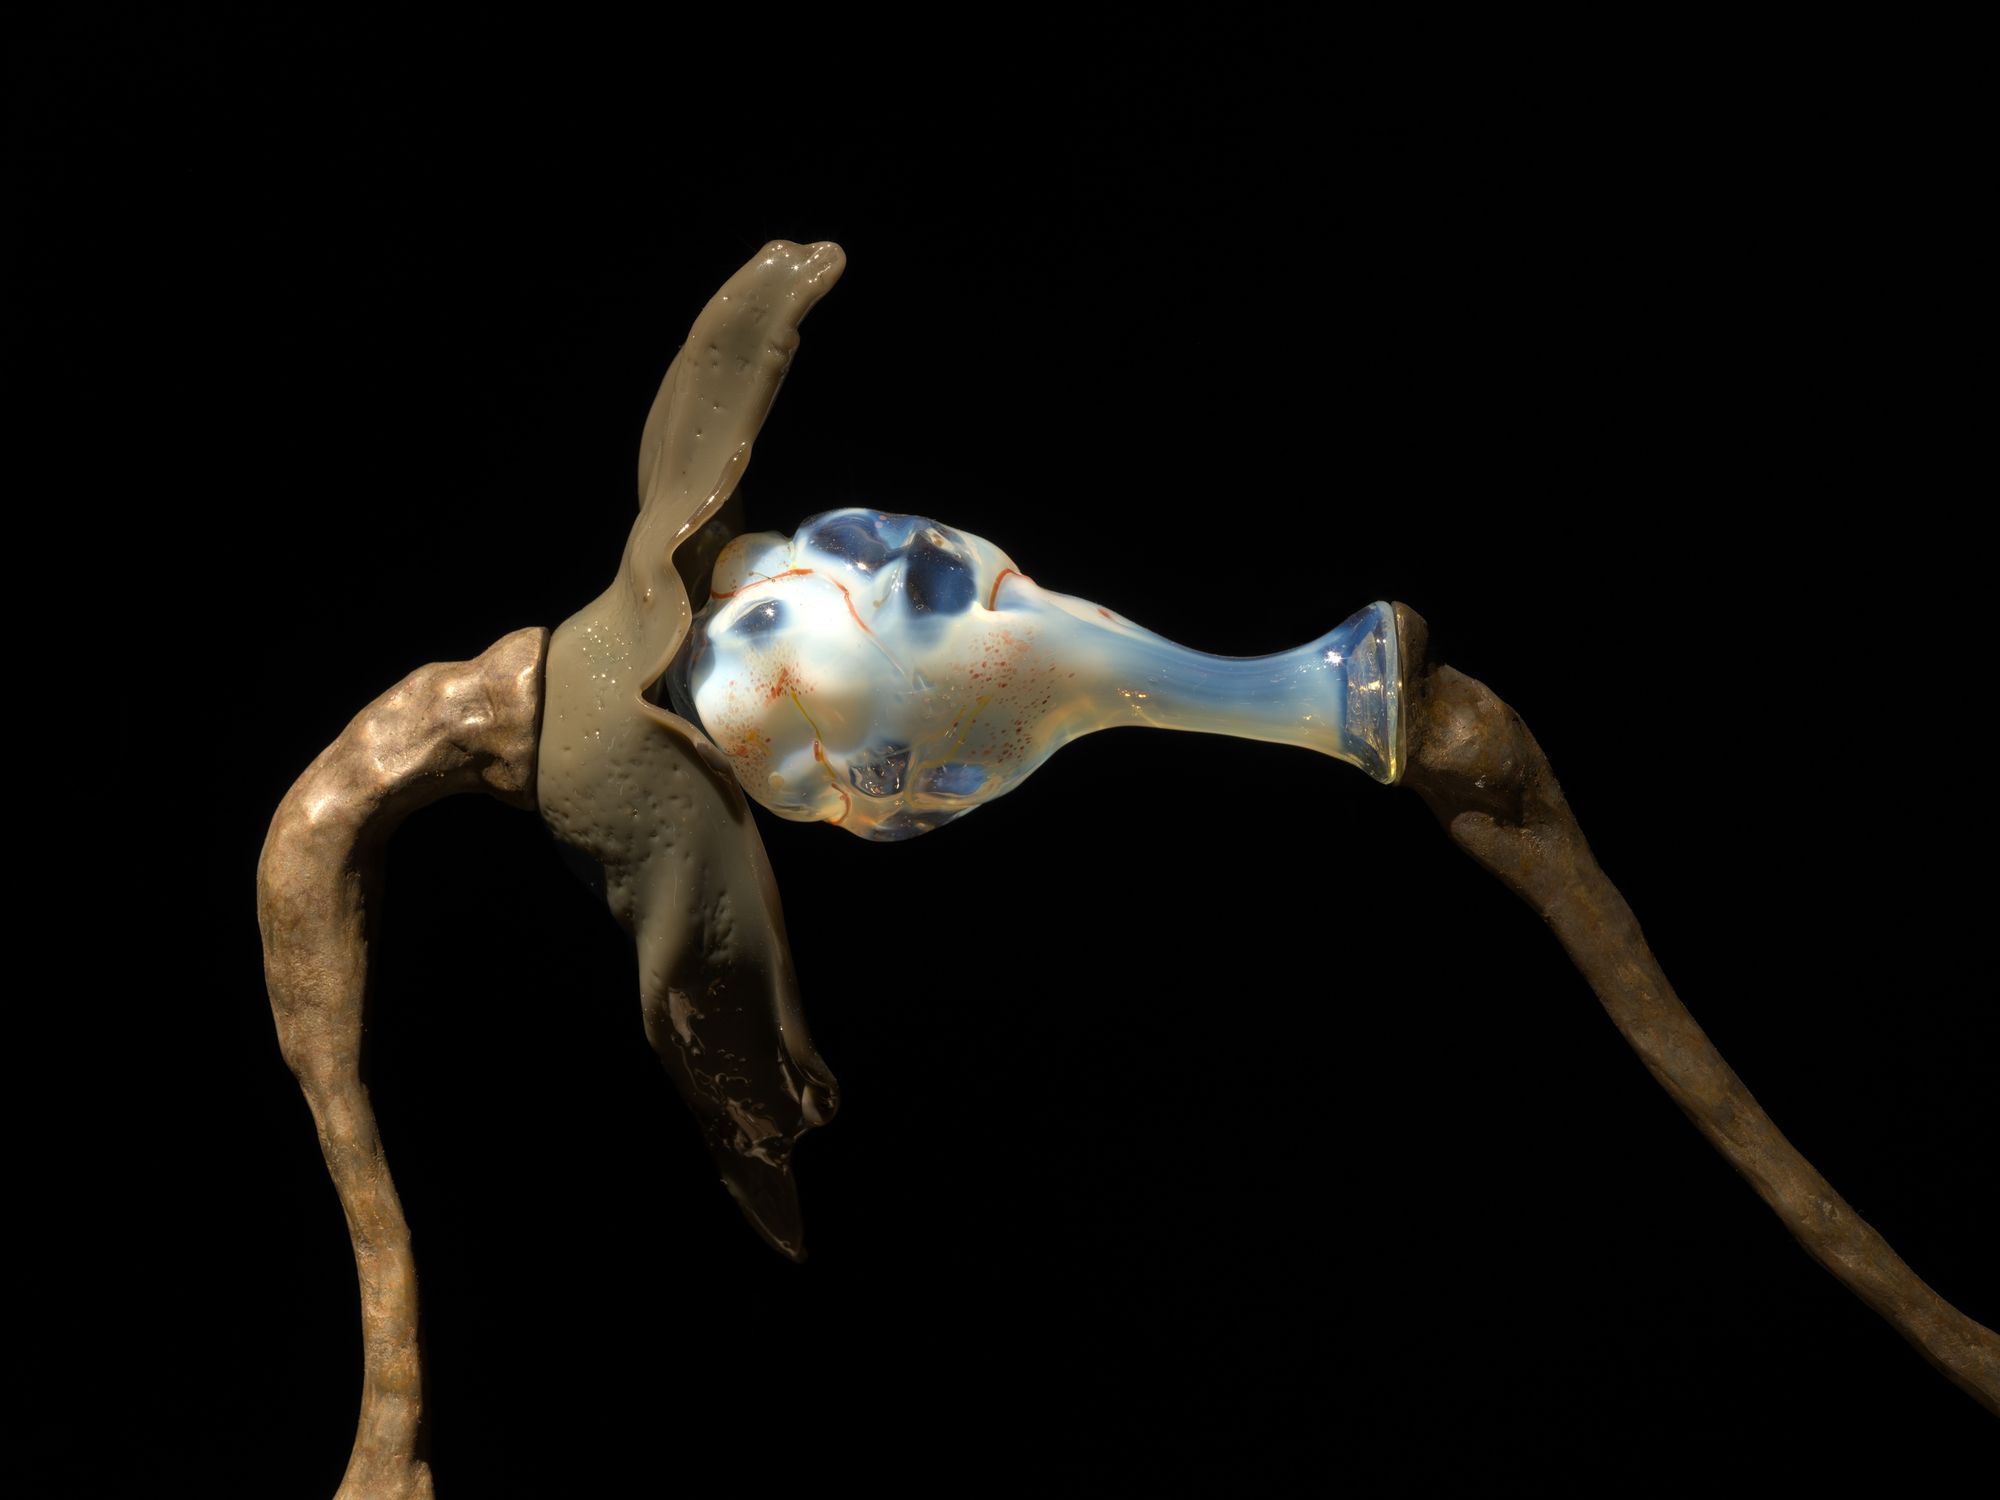 A close-up shot of a sculpture wherein a clear glass bud presses into a metal flower